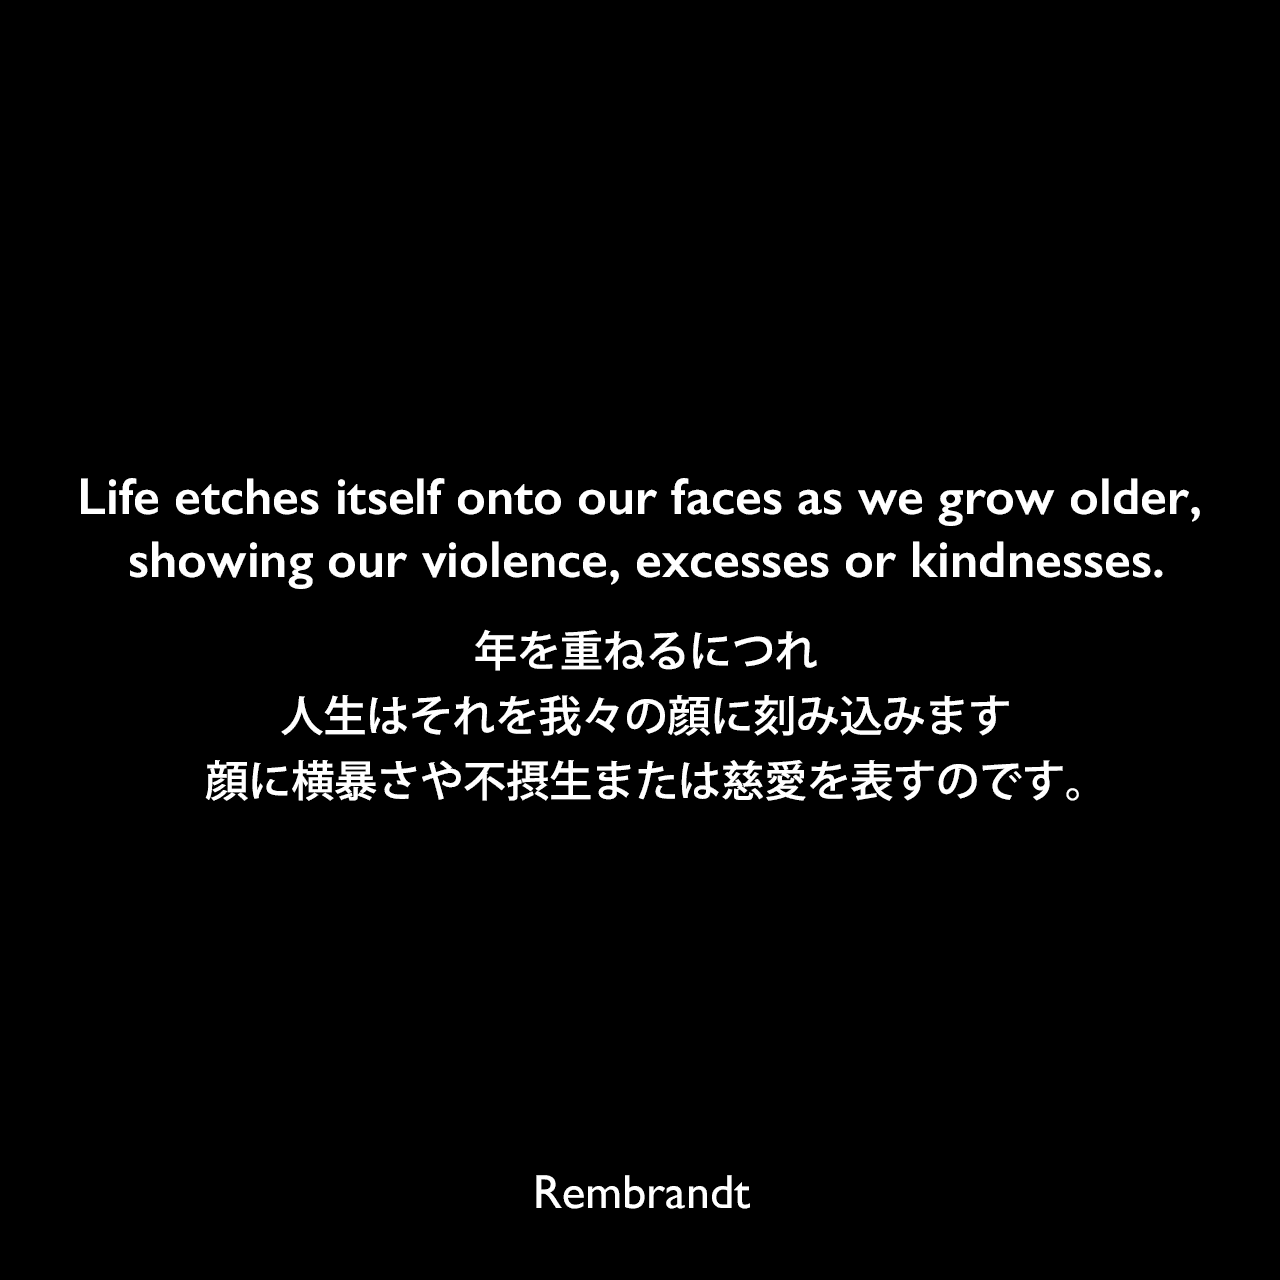 Life etches itself onto our faces as we grow older, showing our violence, excesses or kindnesses.年を重ねるにつれ、人生はそれを我々の顔に刻み込みます、顔に横暴さや不摂生または慈愛を表すのです。Rembrandt